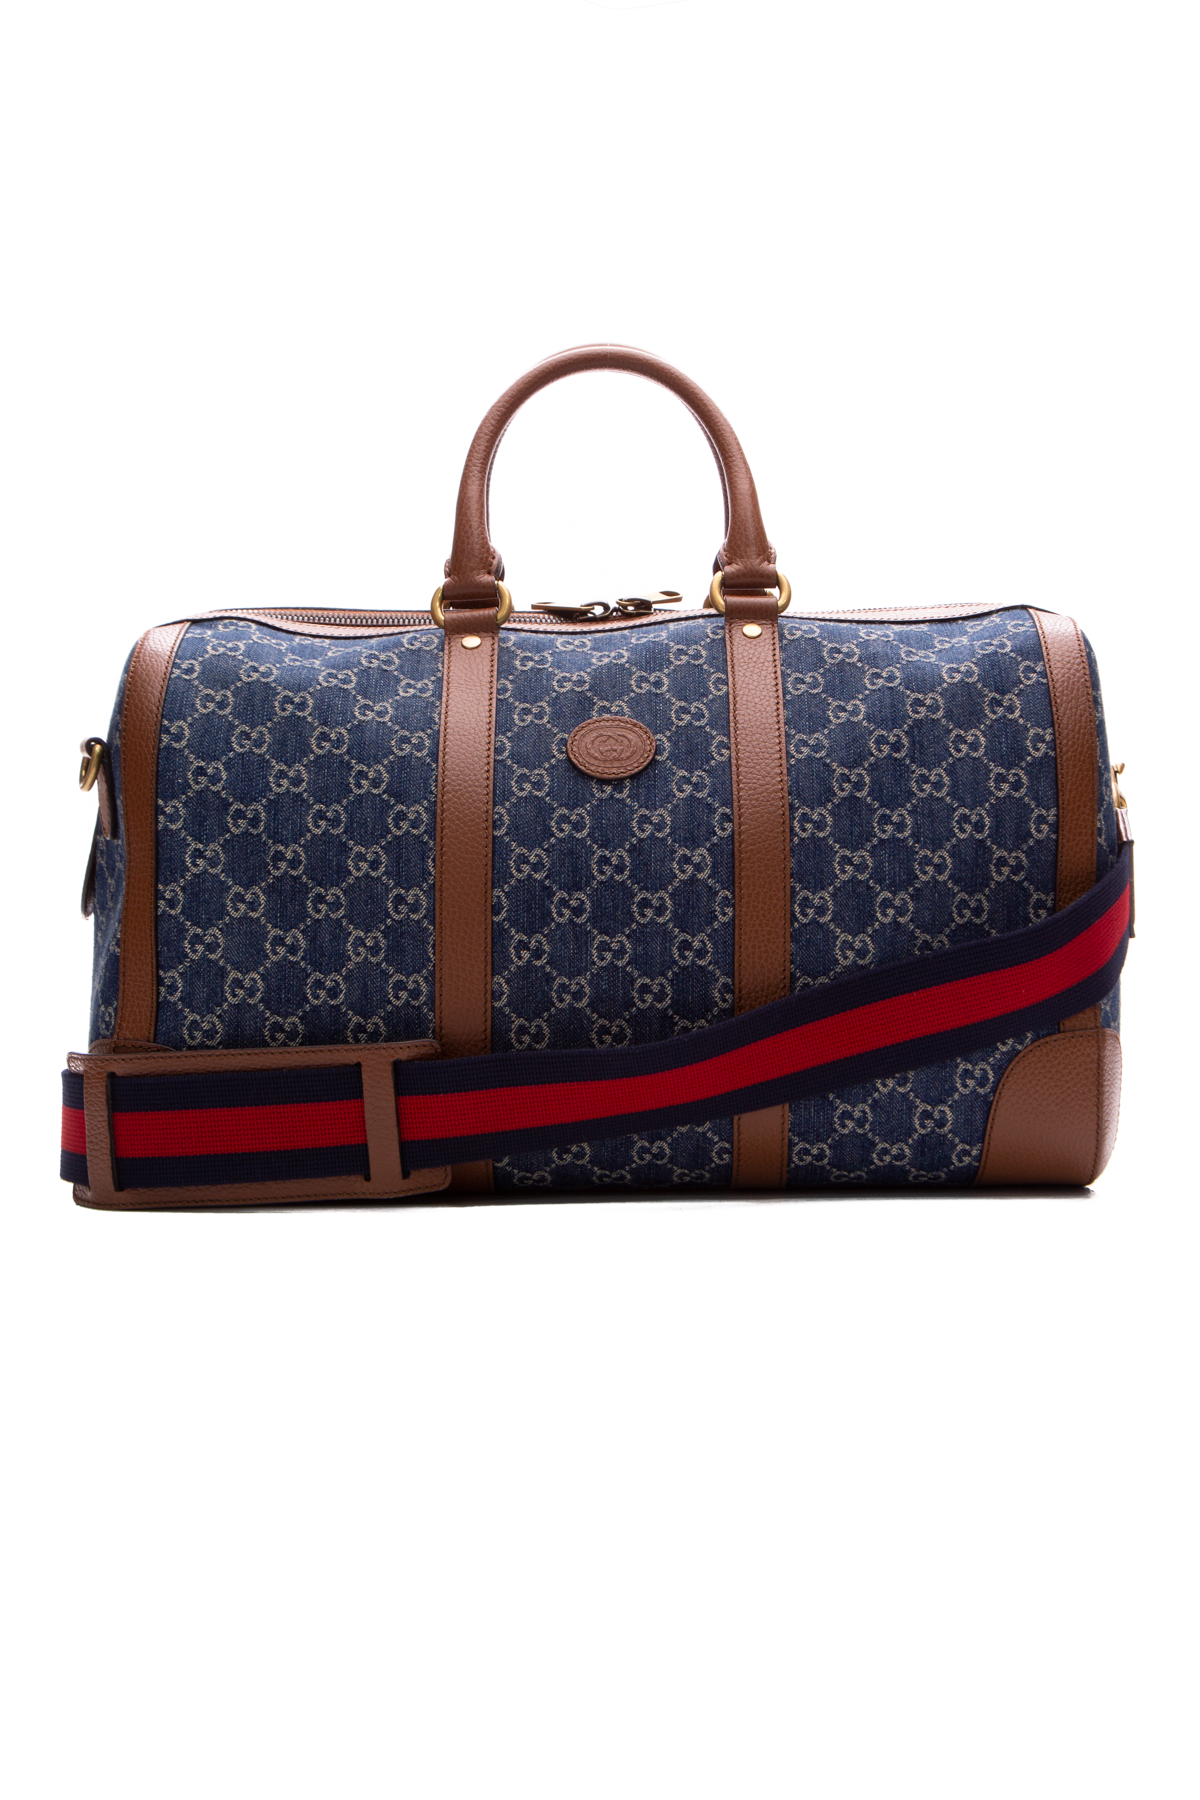 Gucci Savoy small duffle bag in red leather | GUCCI® US